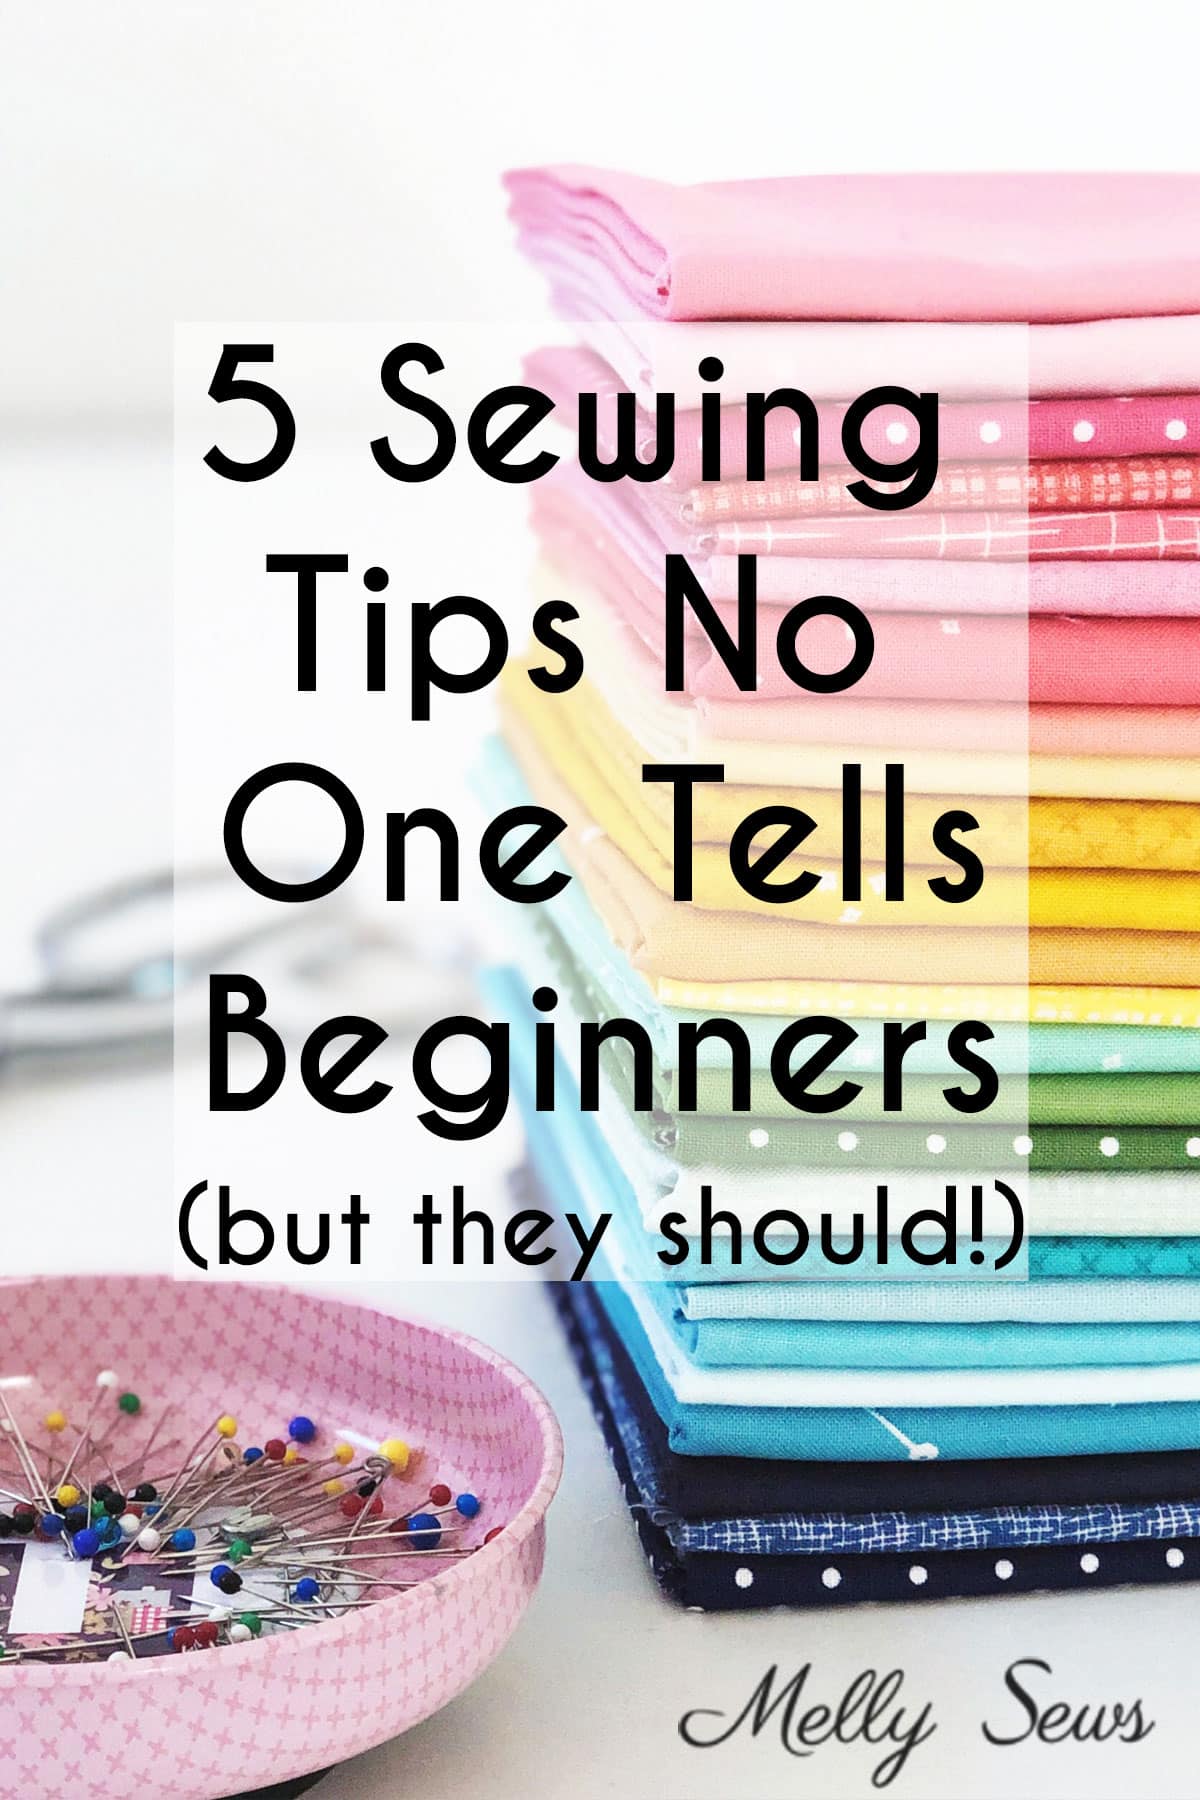 Beginner Sewing Supplies You Didn't Know You Needed